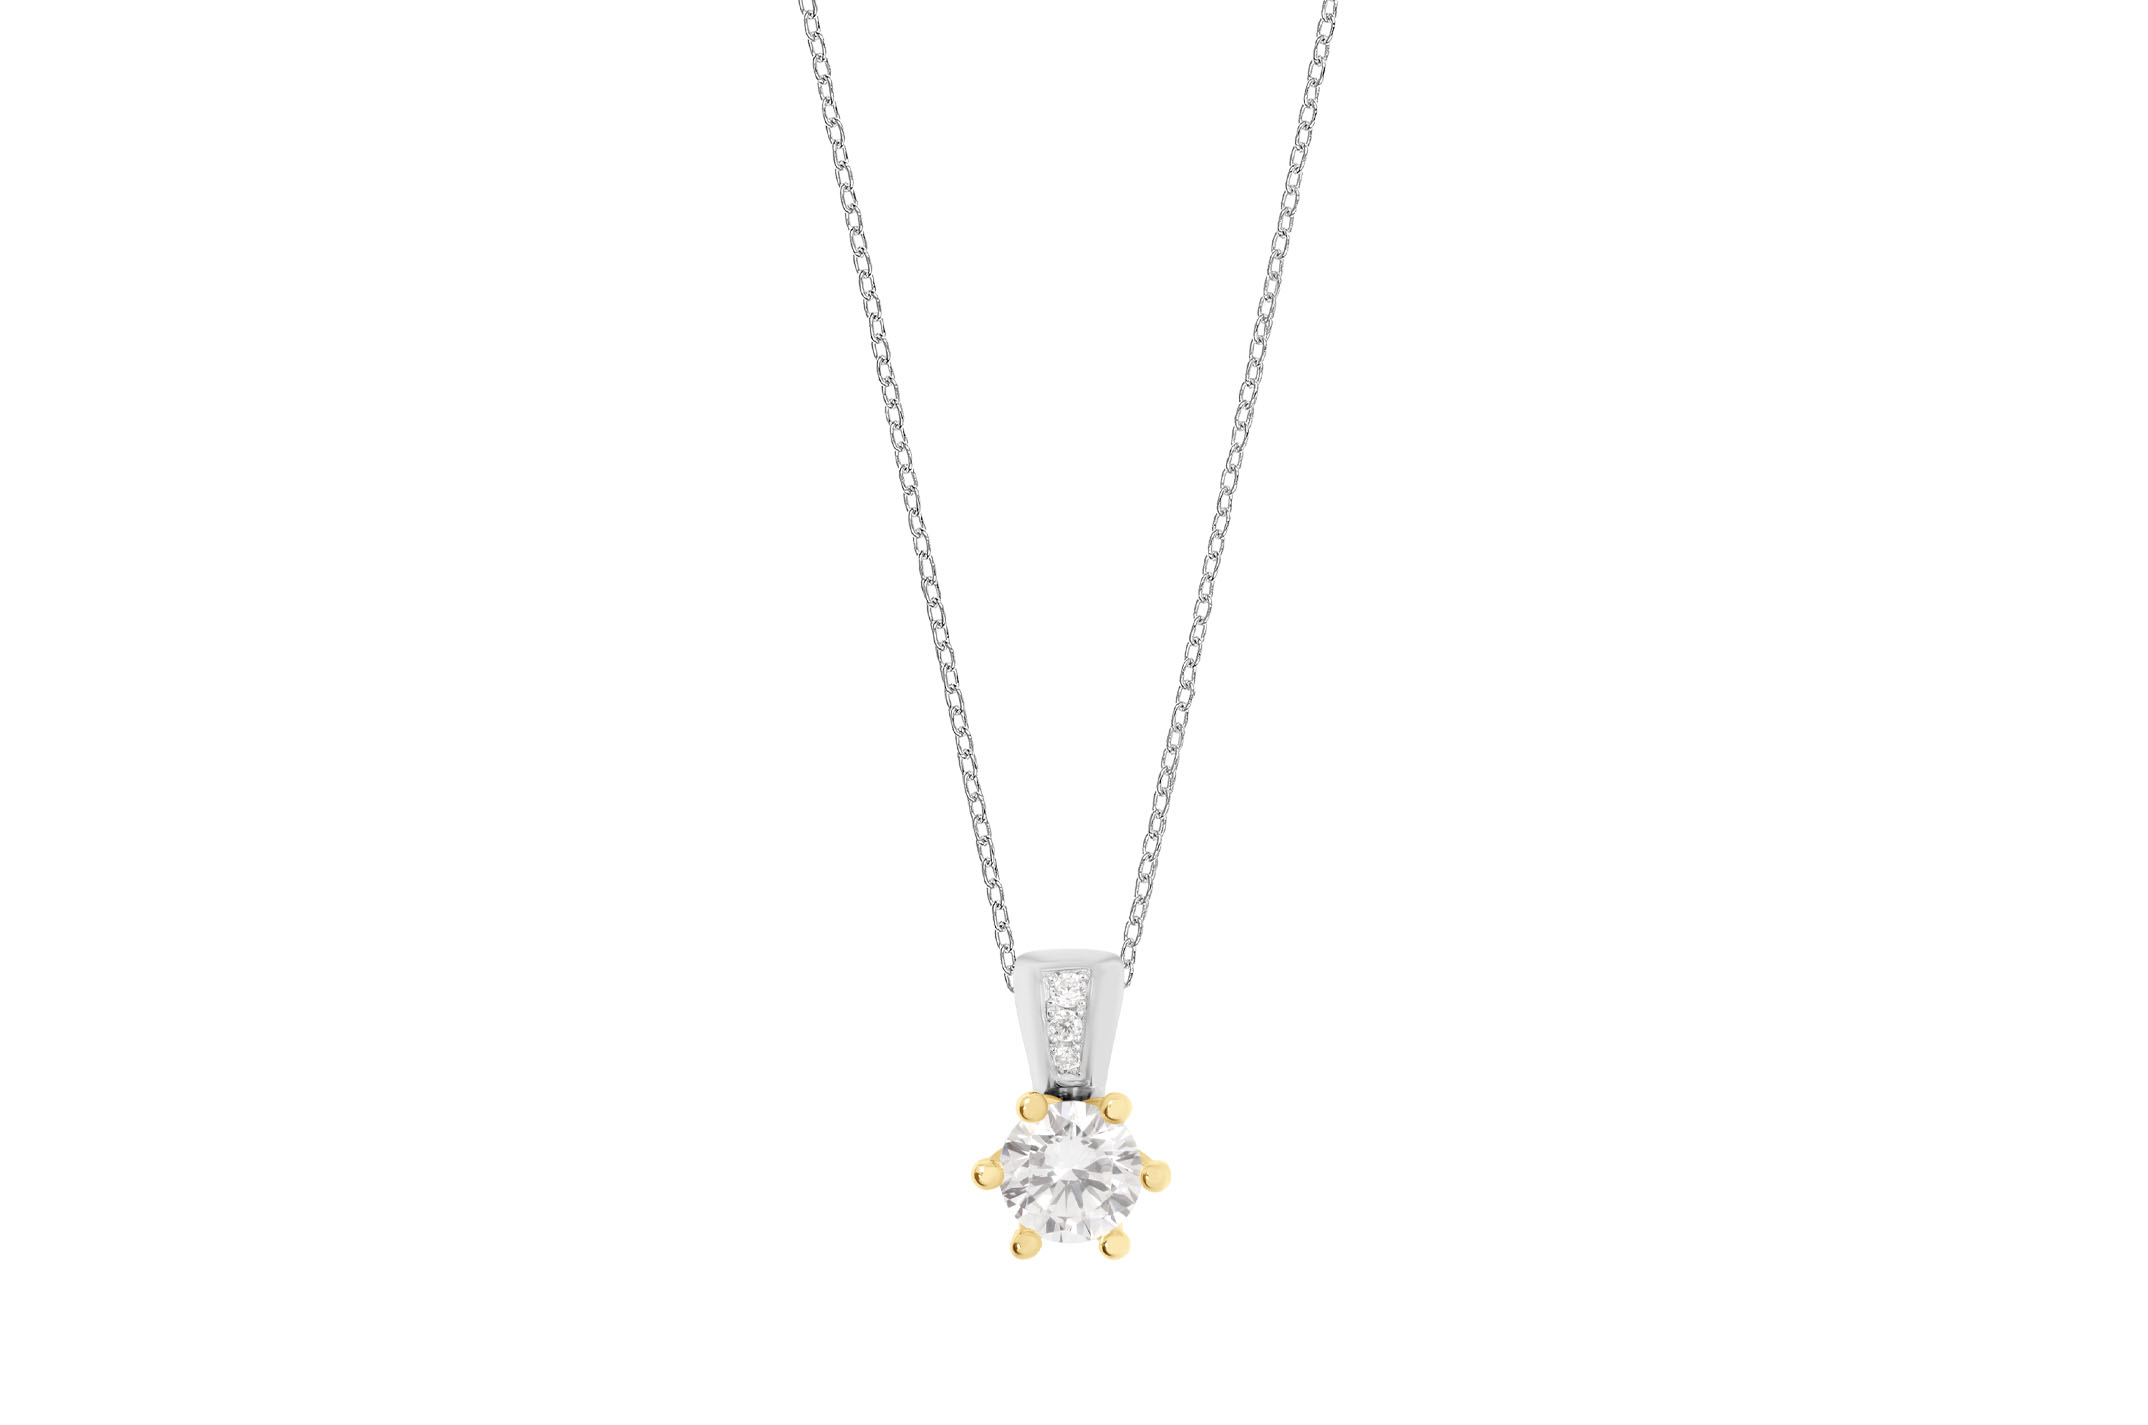 Jewel: necklace;Material: 925 silver and 9K gold;Weight: 4.4 gr (silver) and 1 gr (gold);Color: white and yellow;Size: 38 cm + 5 cm;Pendent size: 0.8 cm